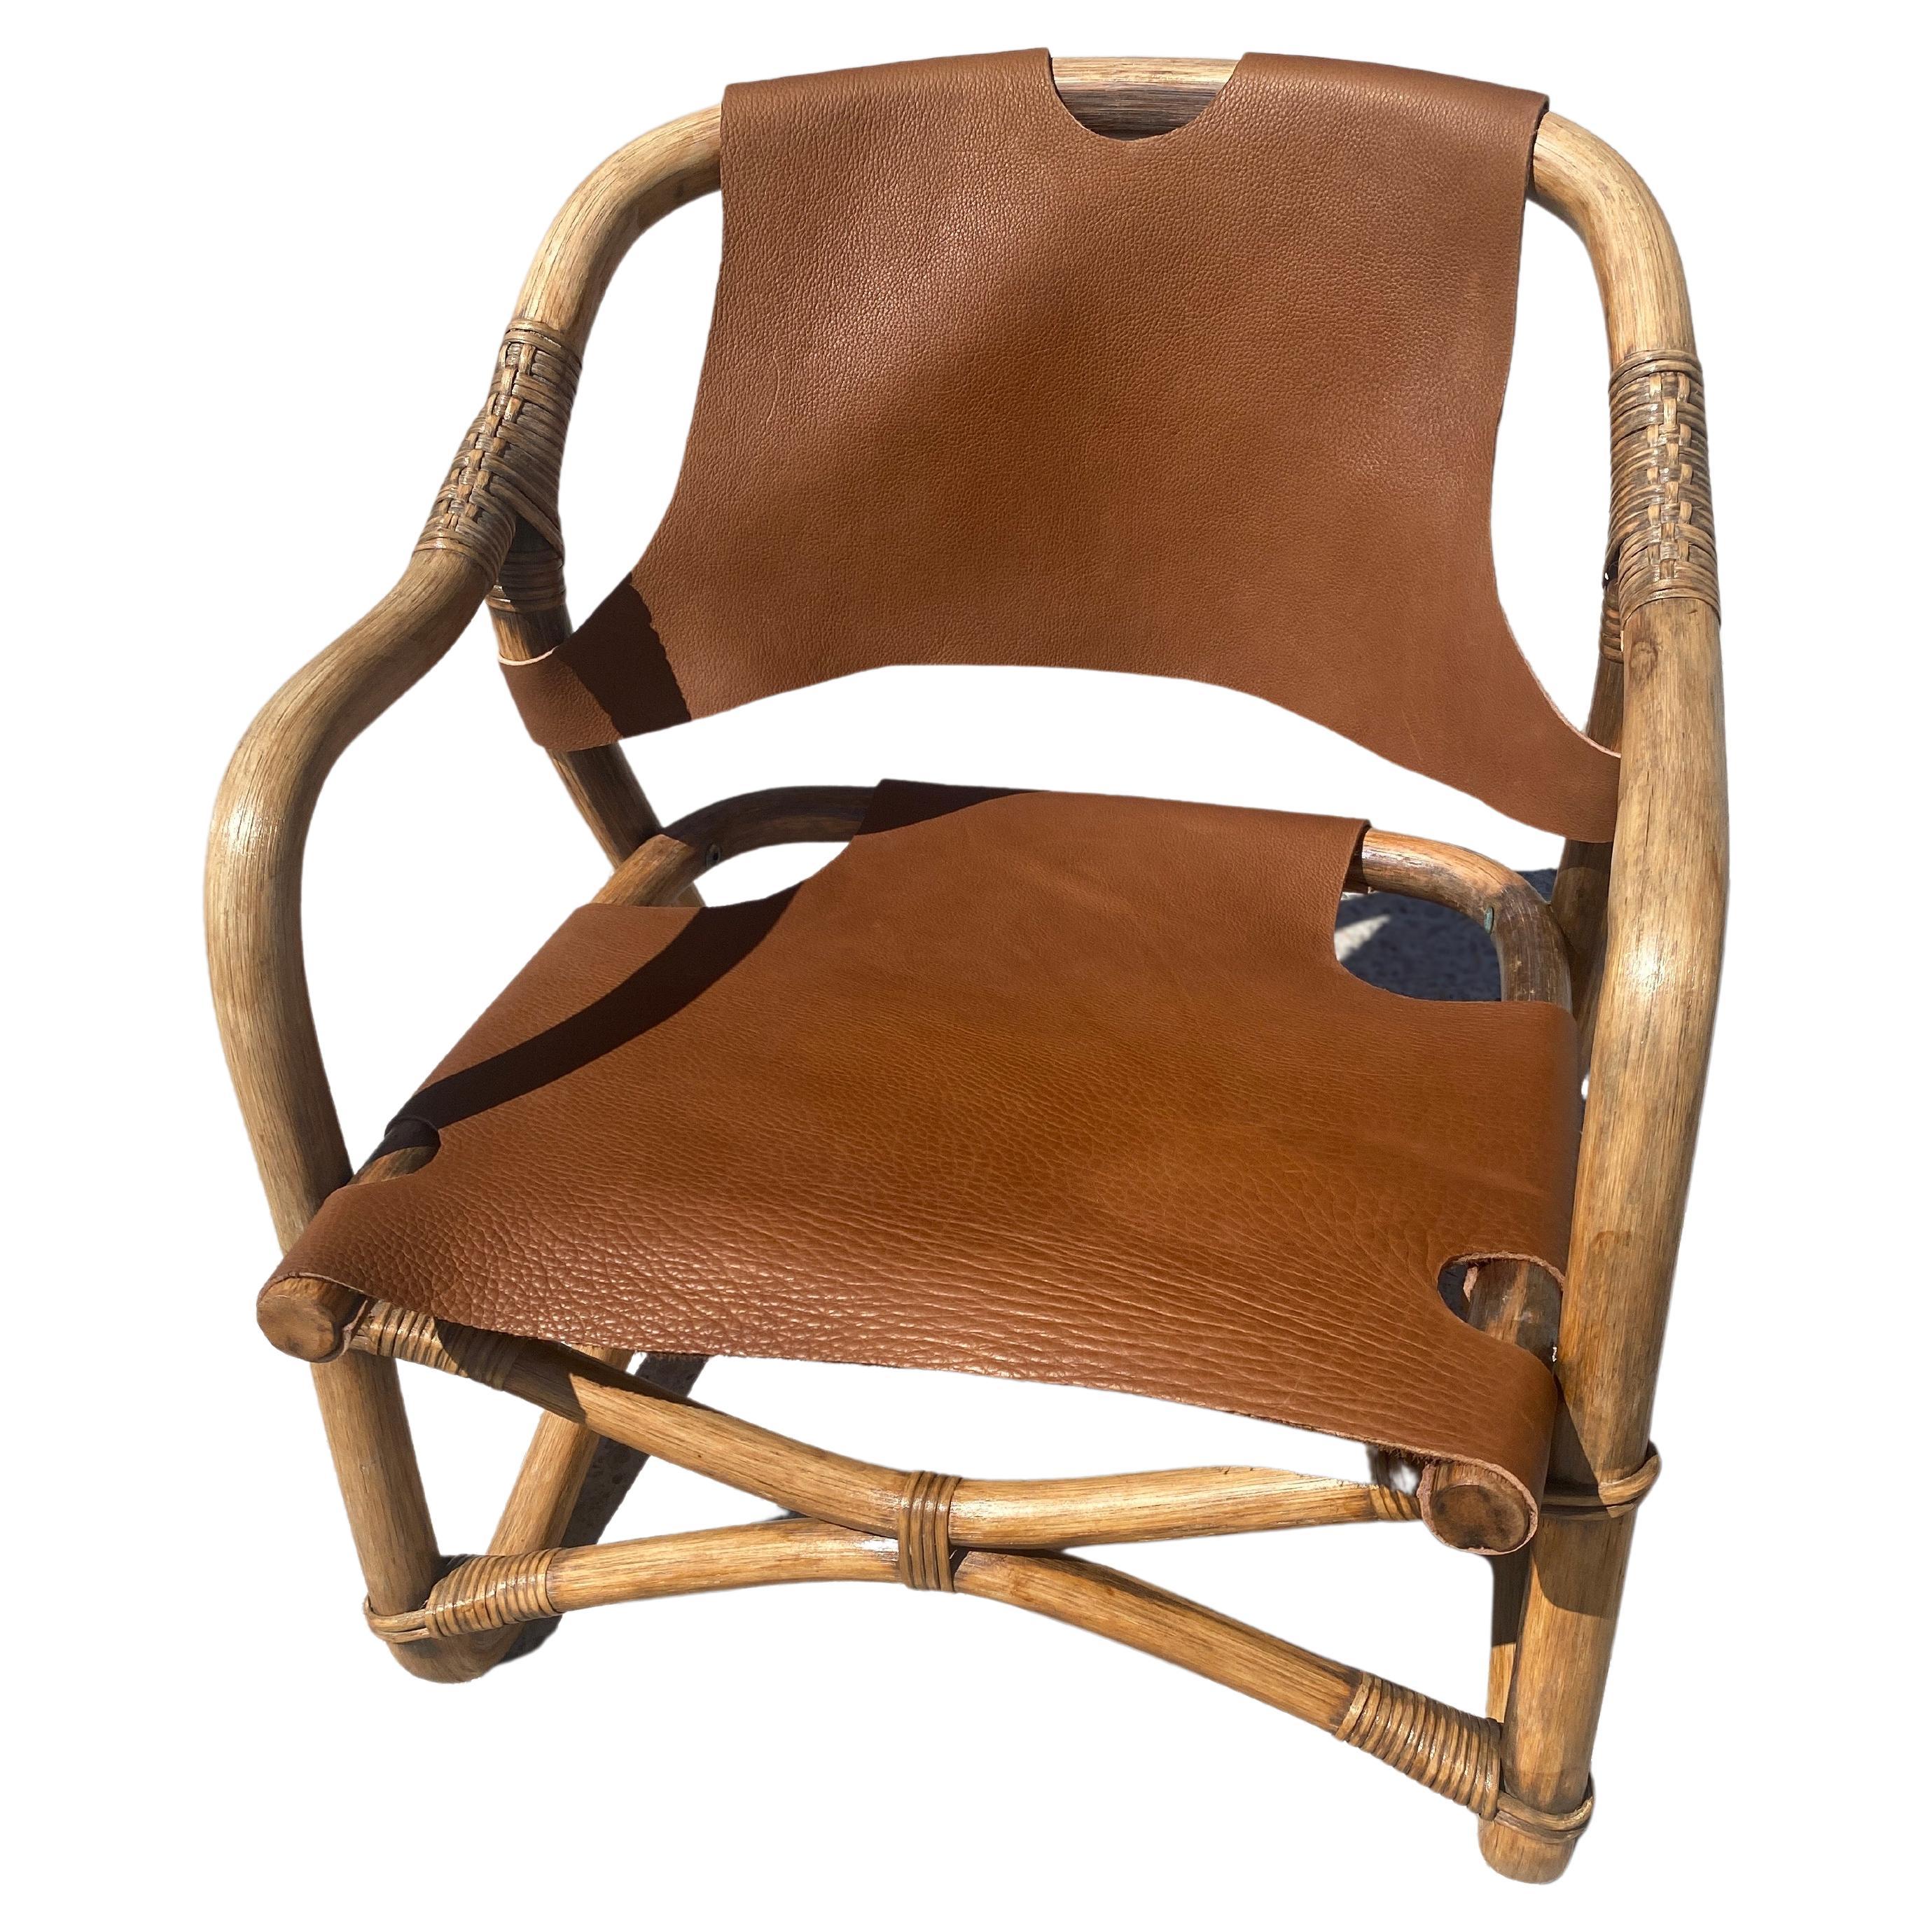 Midcentury Safari Armchair in Bamboo and Leather, Denmark, 1960s